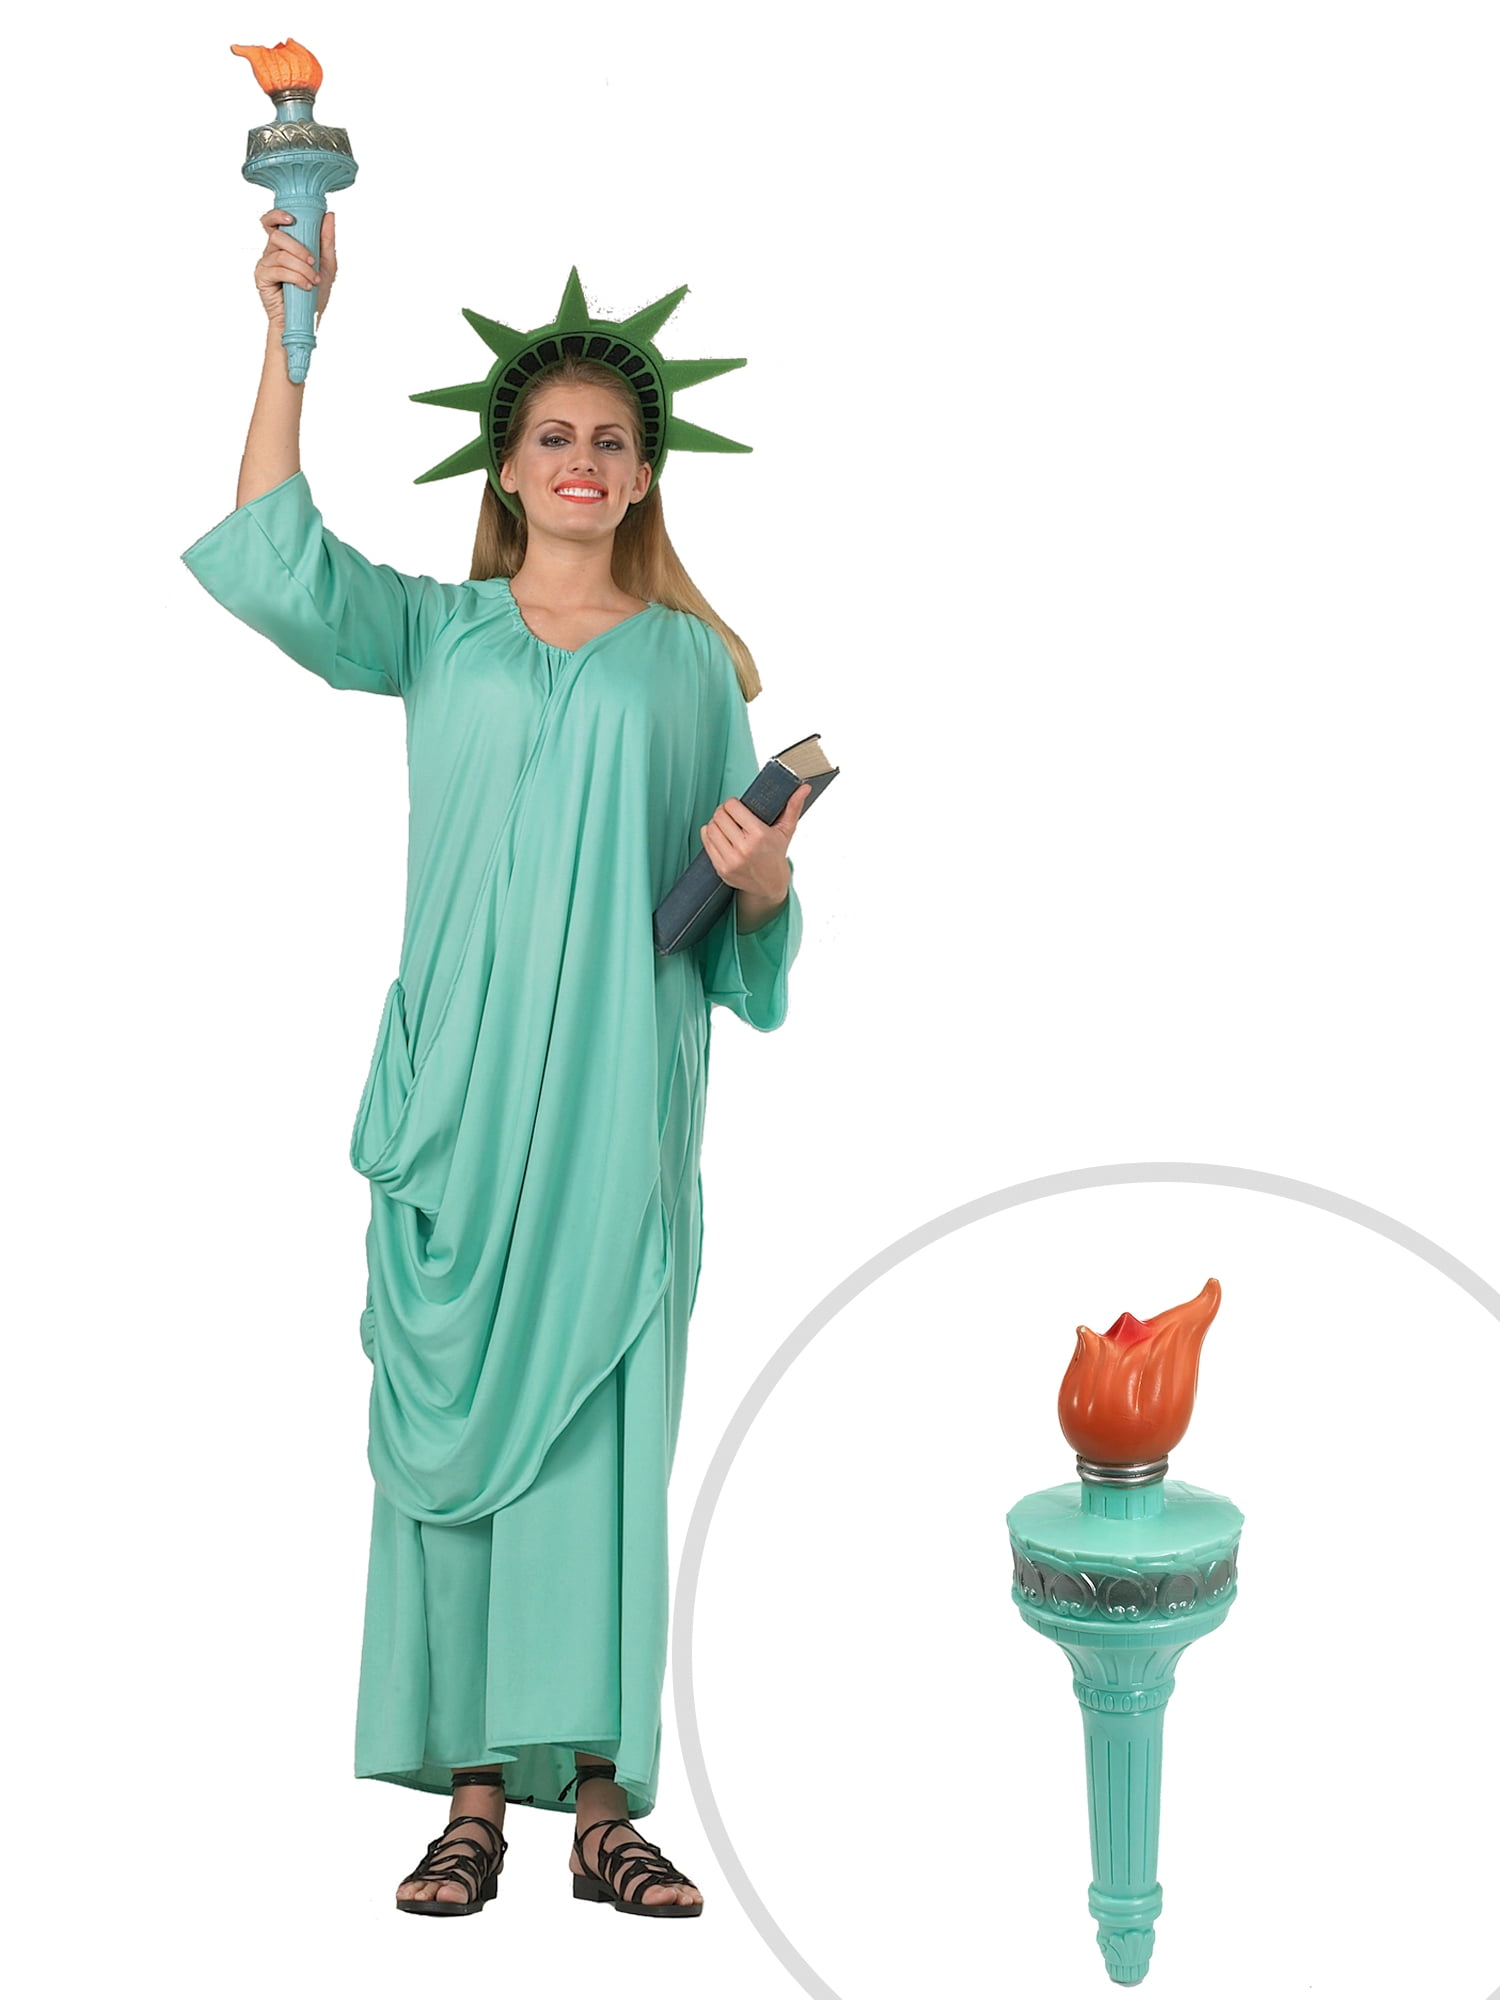 Statue of Liberty Rubber Torch Adults Fancy Dress American Costume Accessory New 